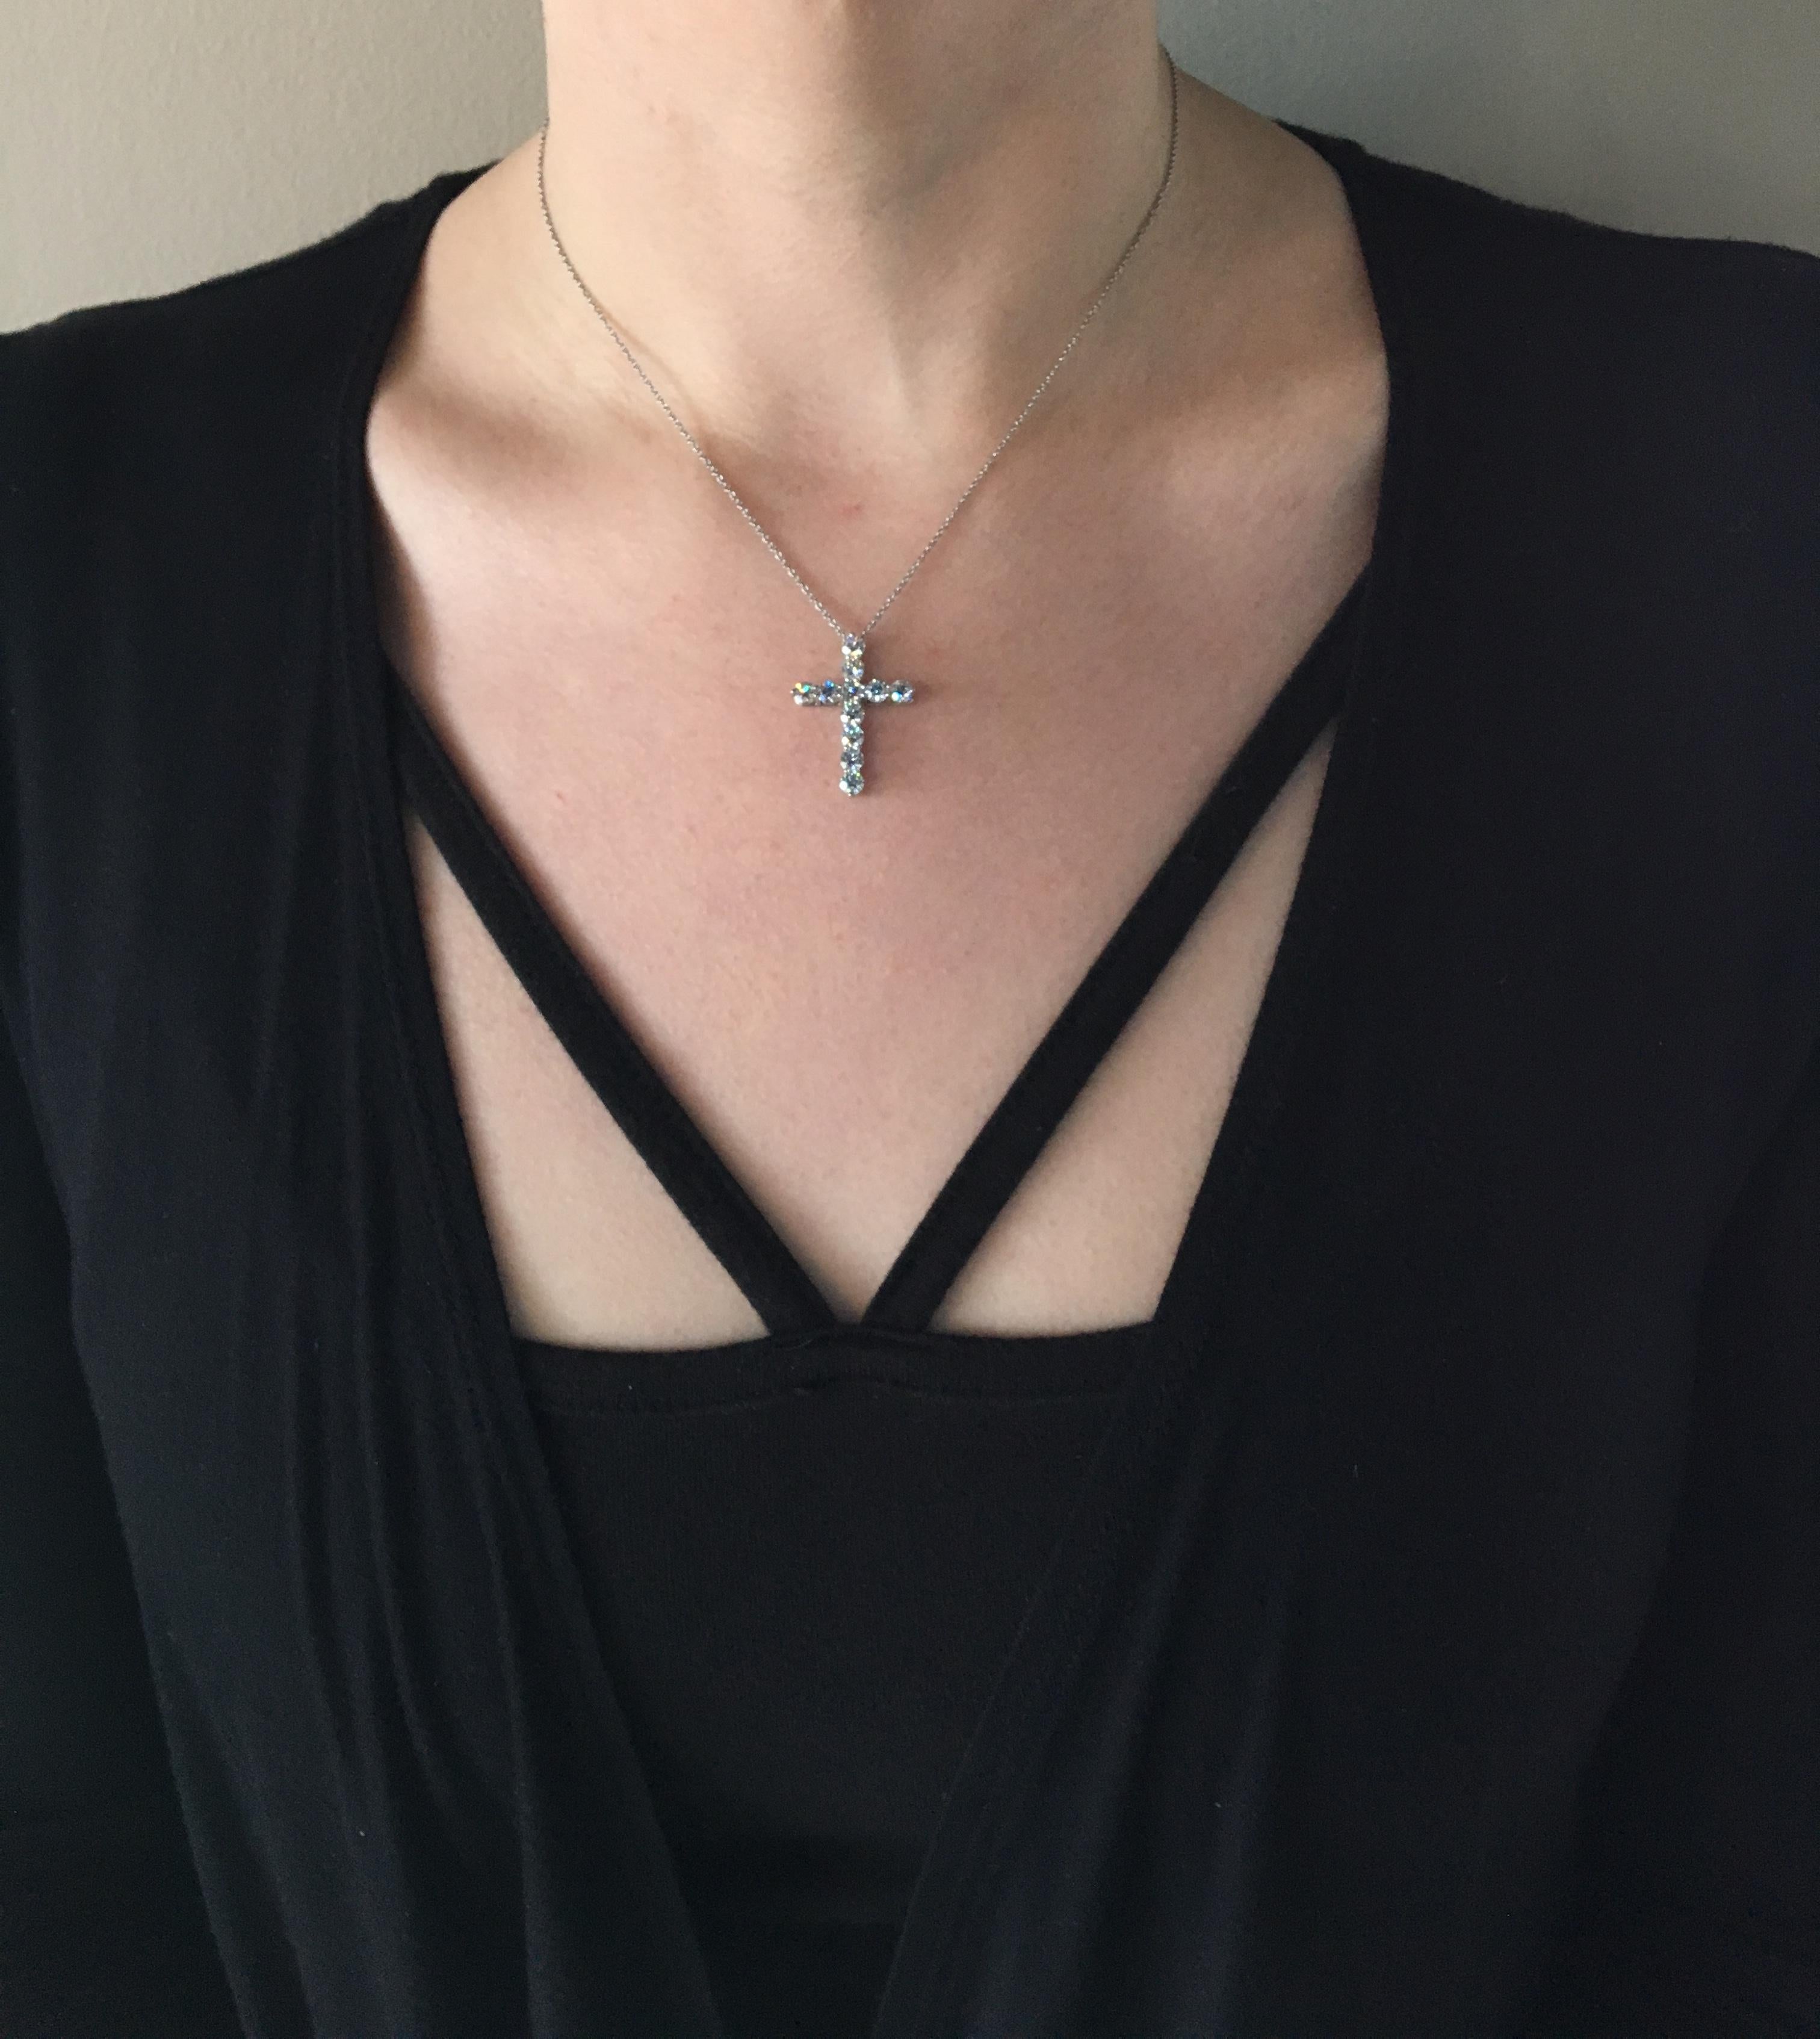 This beautiful platinum Tiffany & Co. necklace features a stunning diamond Tiffany & Co. cross with approximately 2.00CTW of diamonds.

Diamond Carat Weight: Approximately 2.00CTW
Diamond Cut: Round Brilliant
Color: Average D-E
Clarity: Average